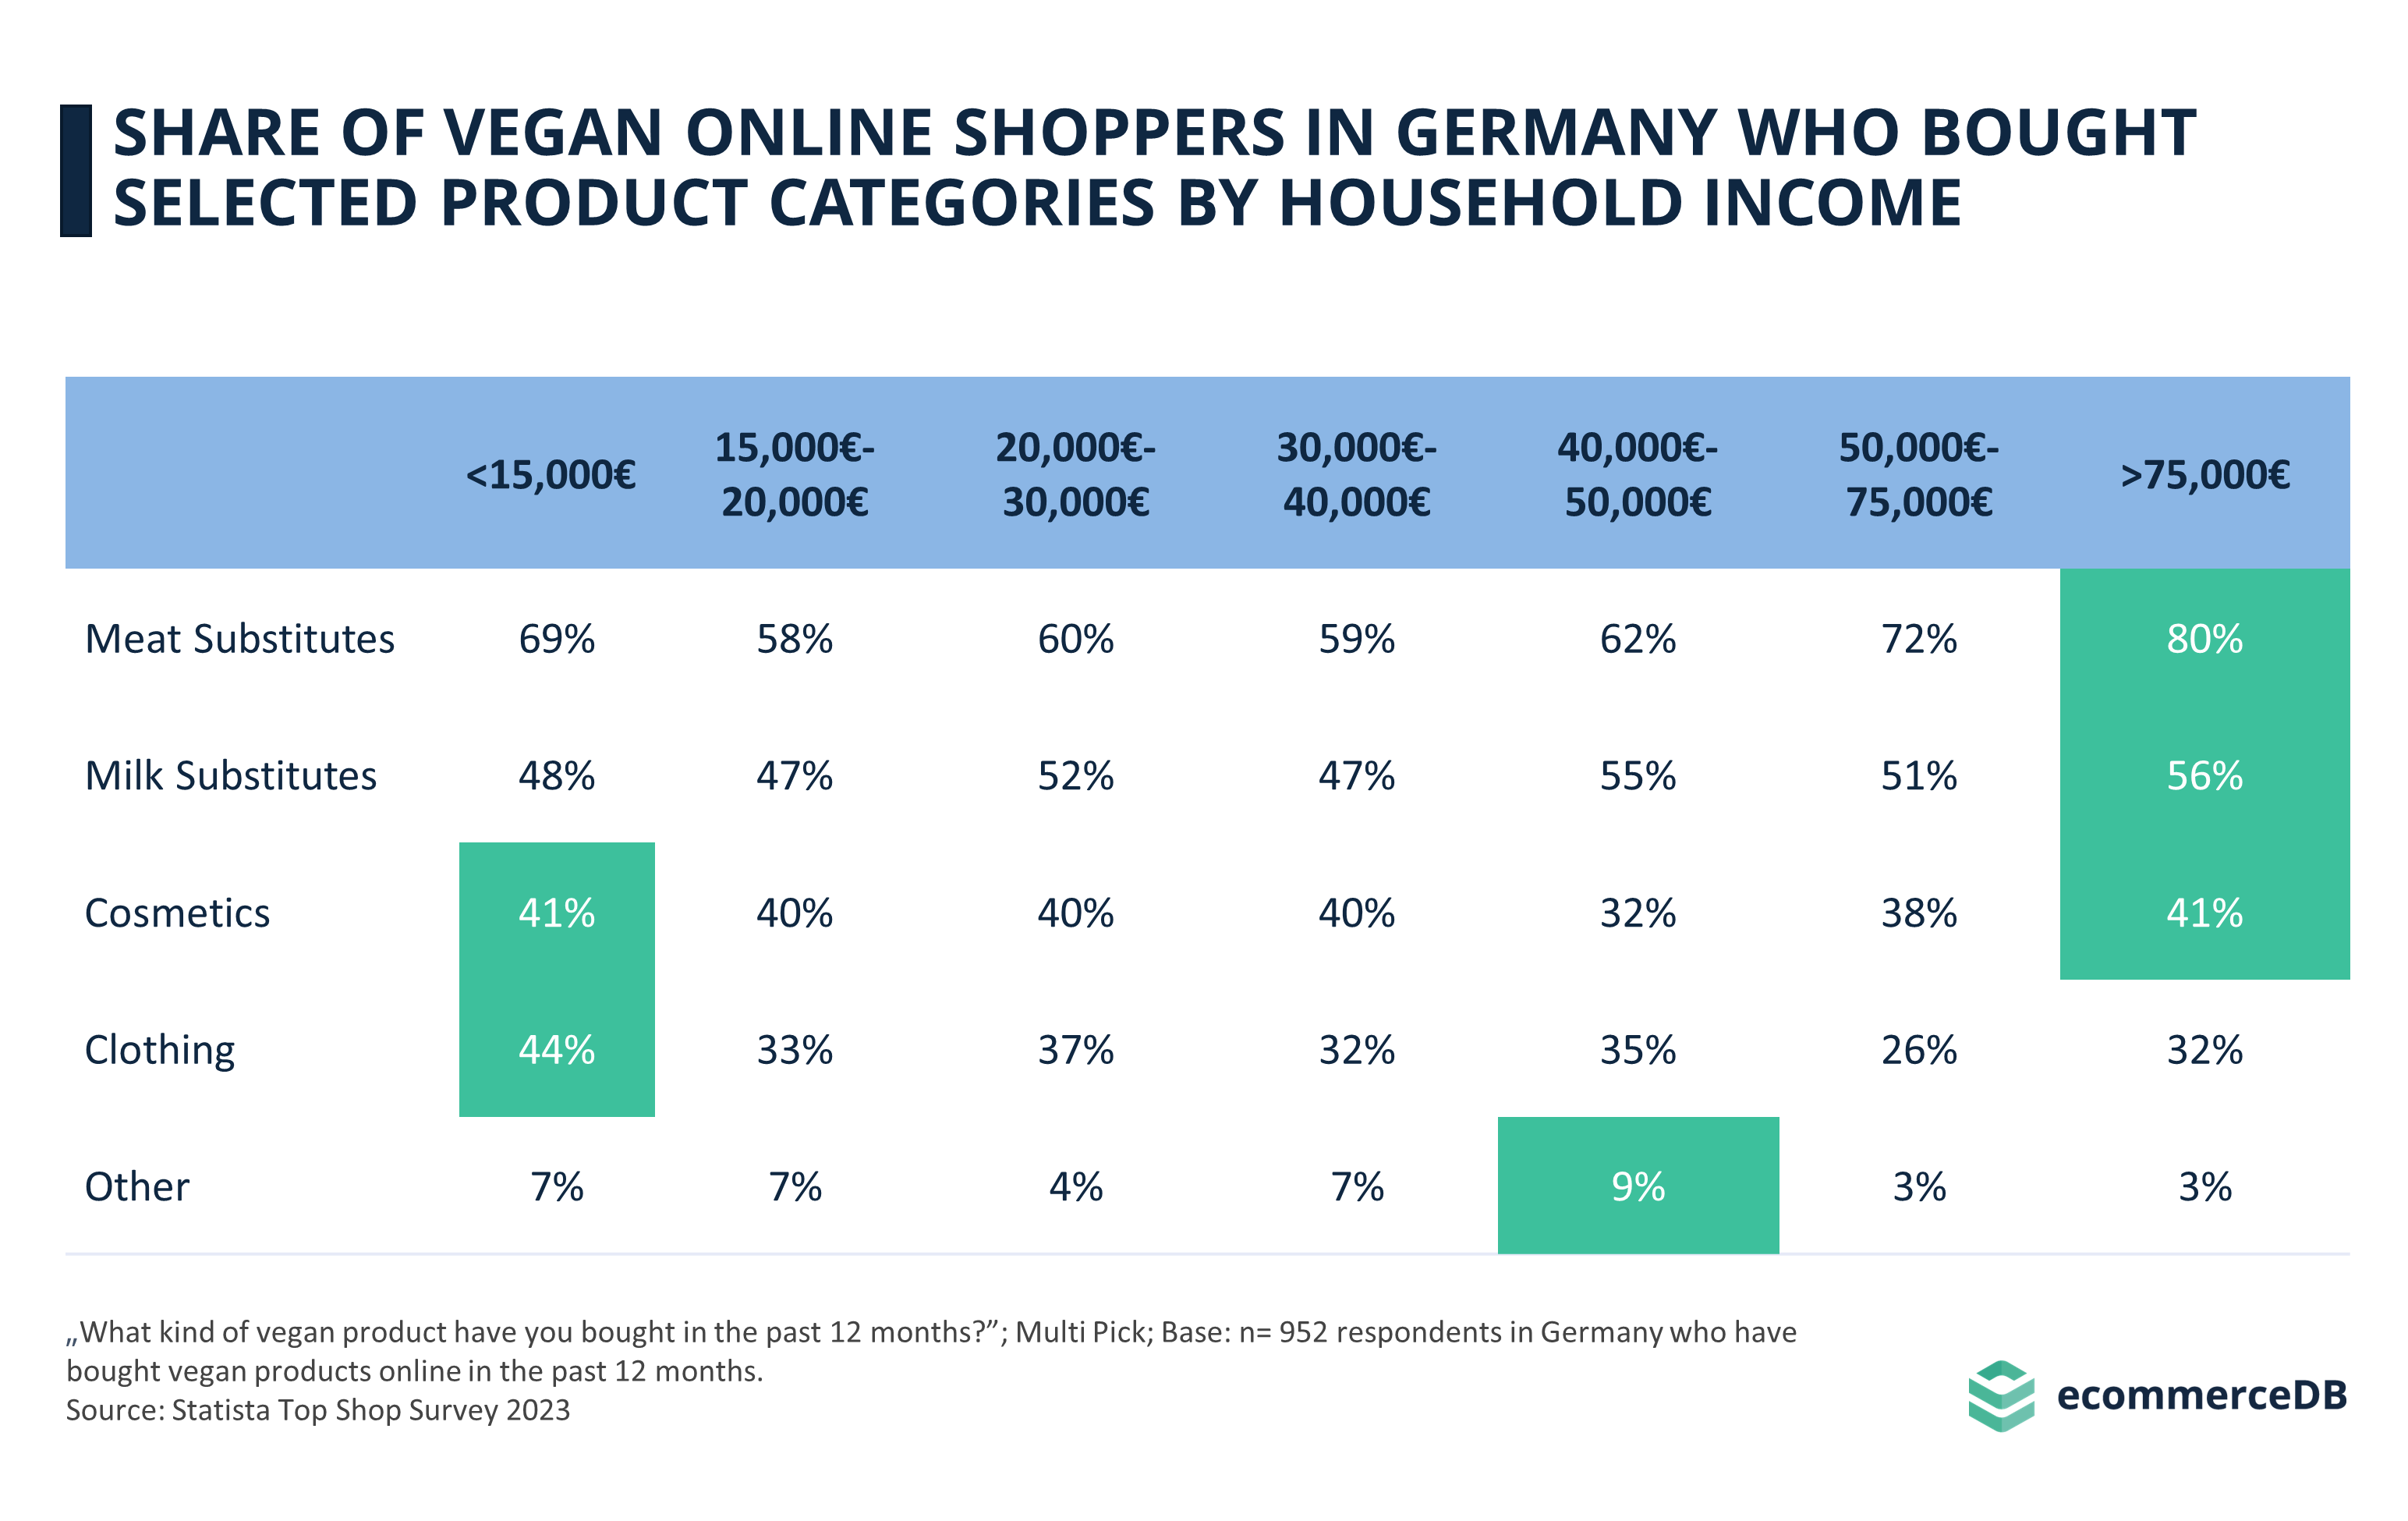 Share of Vegan Online Shoppers in Germany Who Bought Selected Product Categories by Household Income